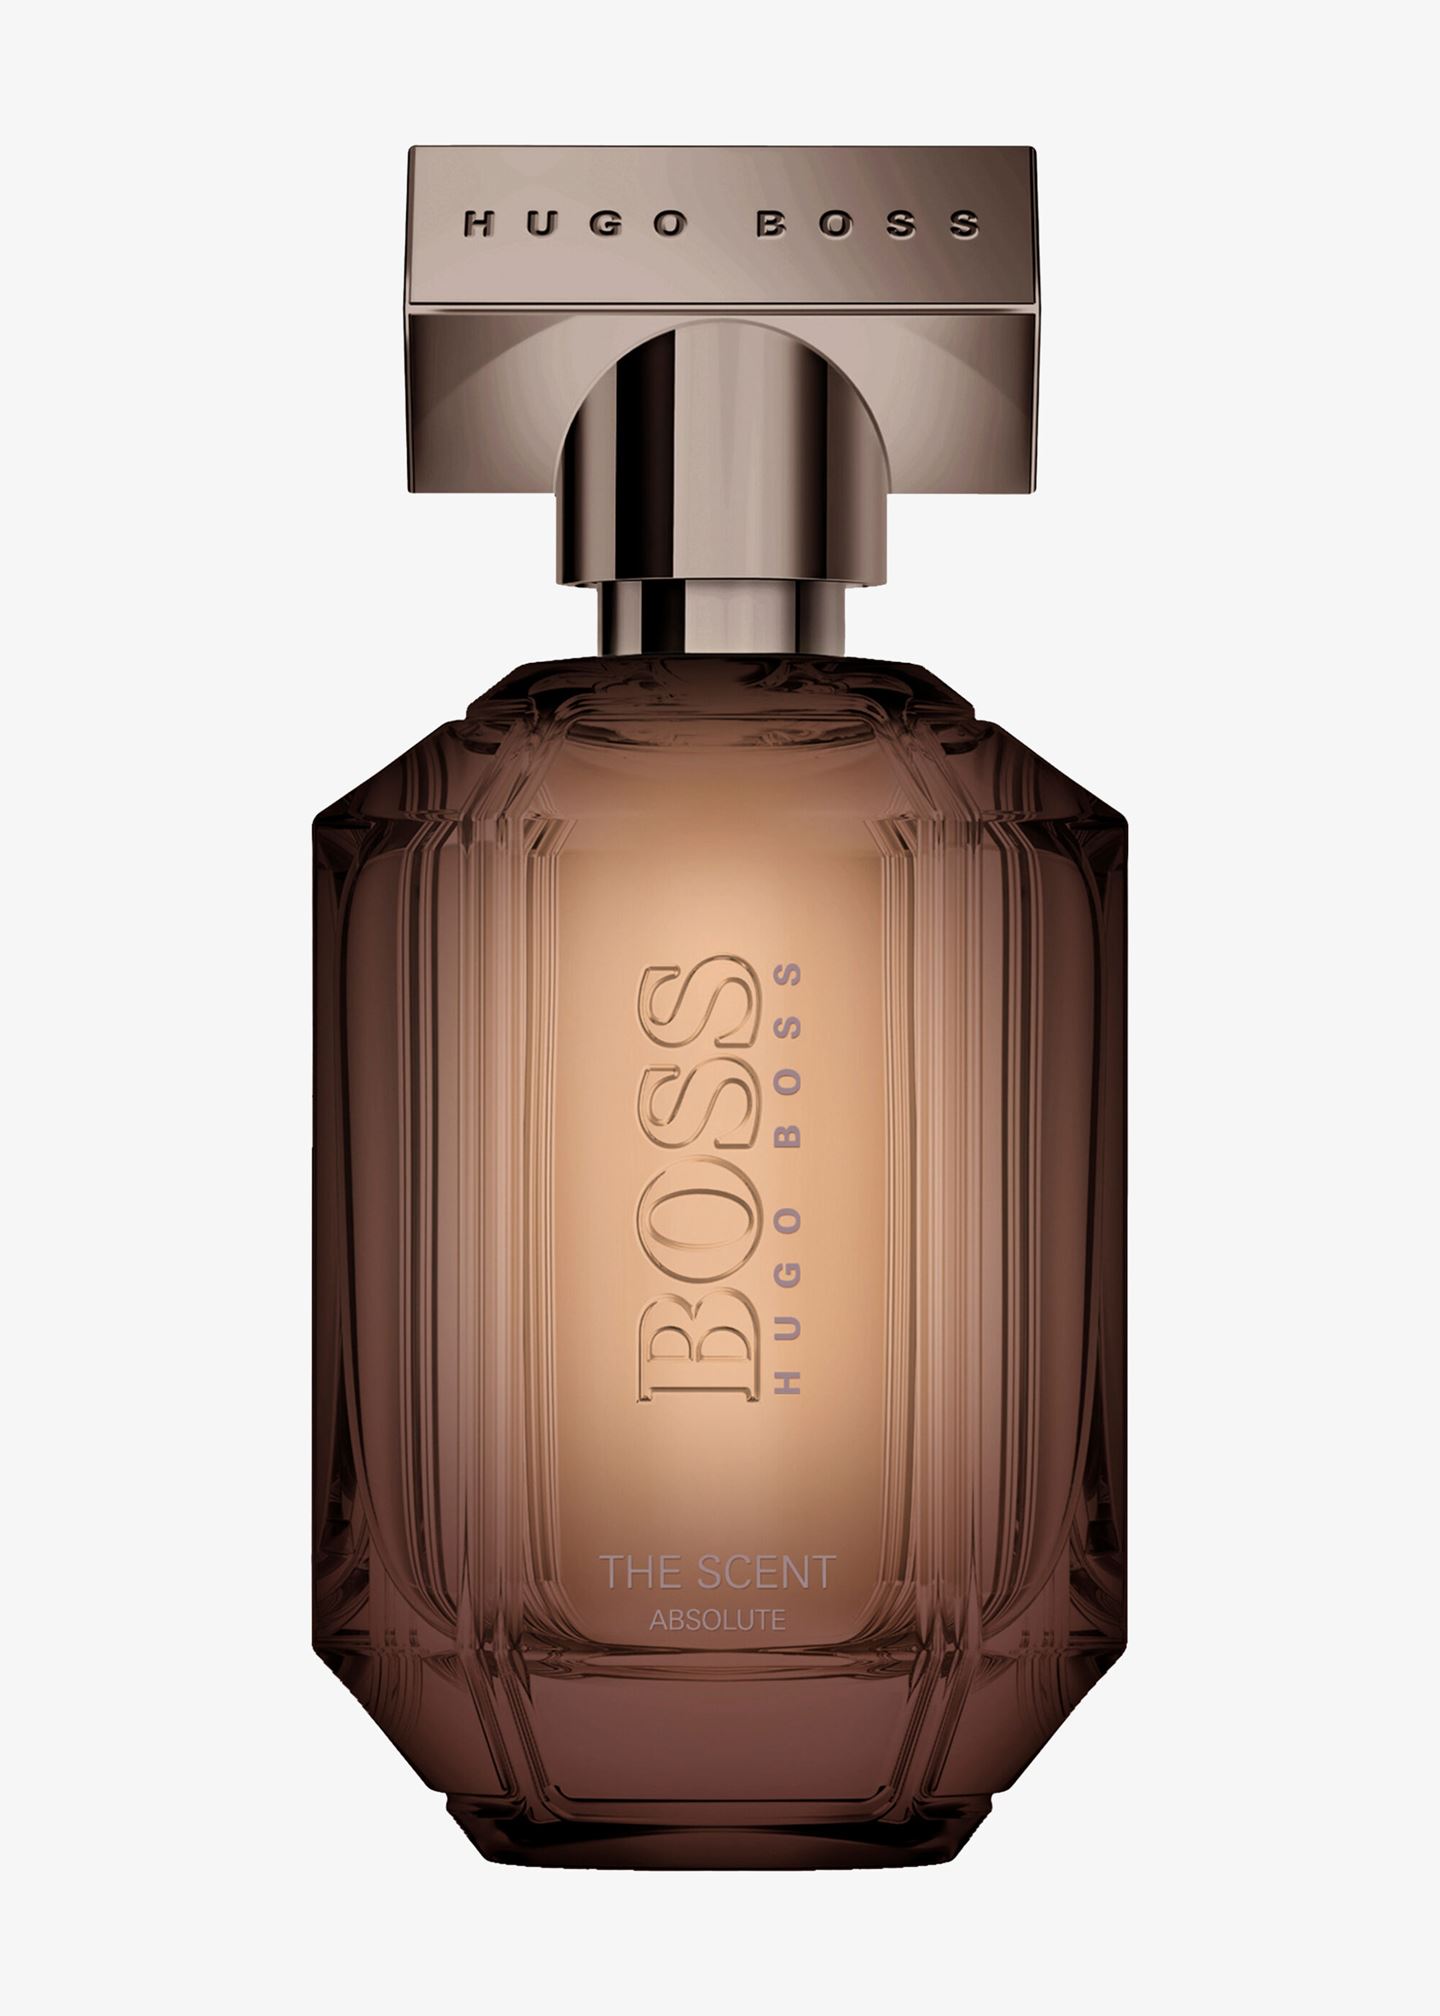 Parfum «The Scent Absolute»